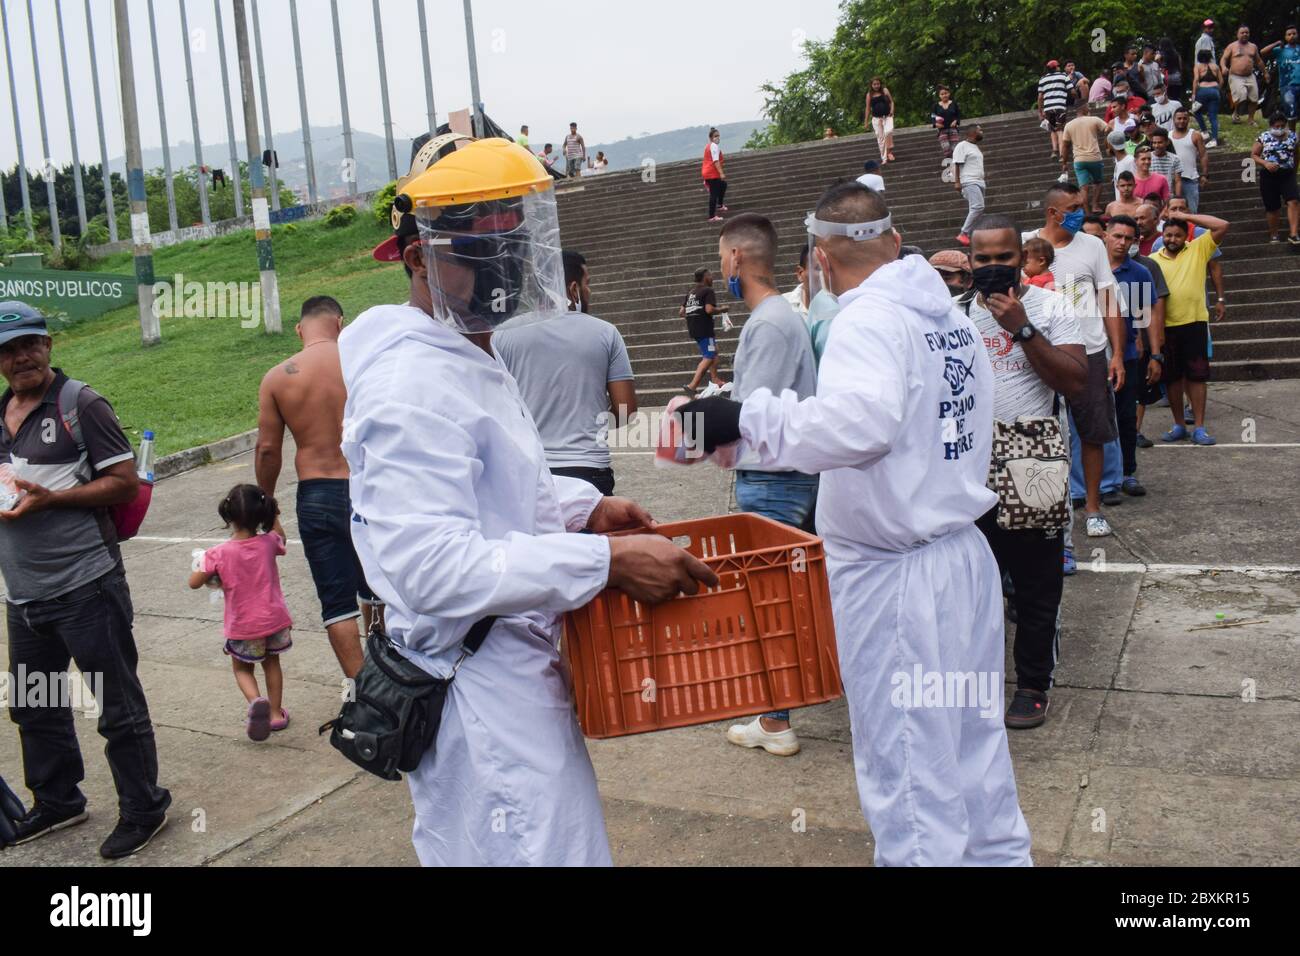 Members of 'Jesús Pescador de Hombres' foundation giving food aid to stranded Venezuelans in Cali. The organisation prepares and distributes hundreds Stock Photo